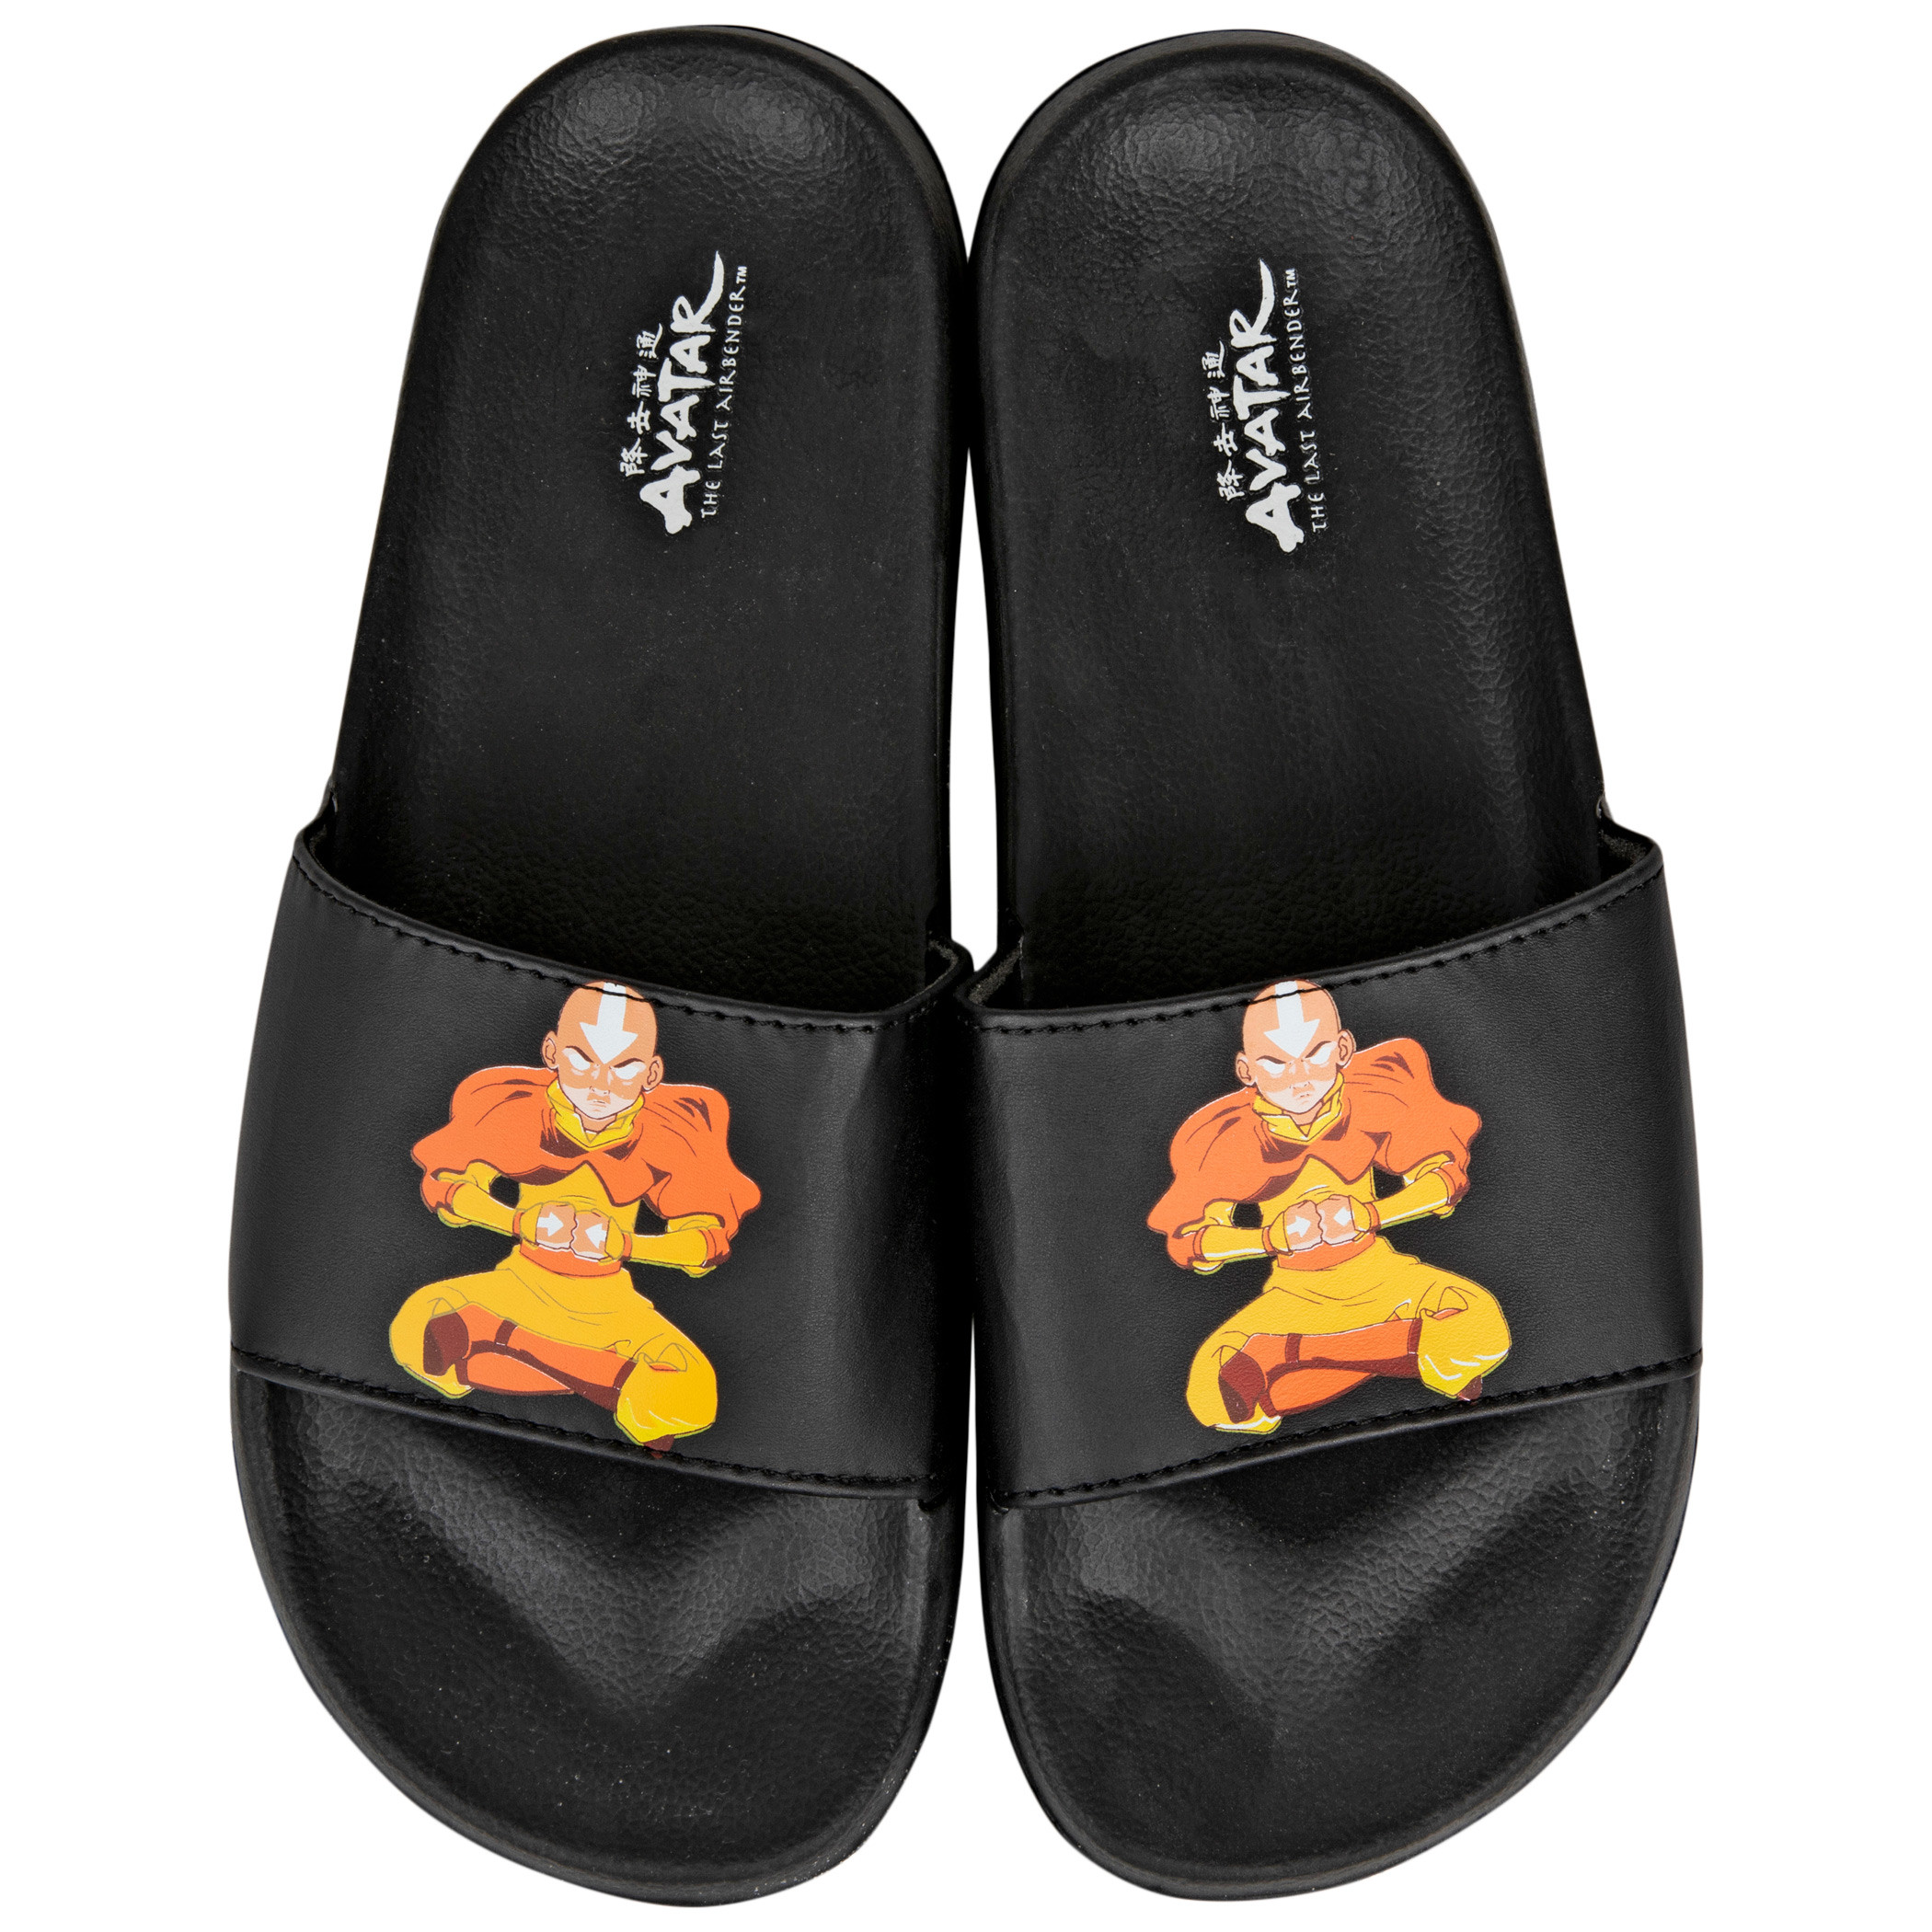 Avatar: The Last Airbender Character Slides Sandals